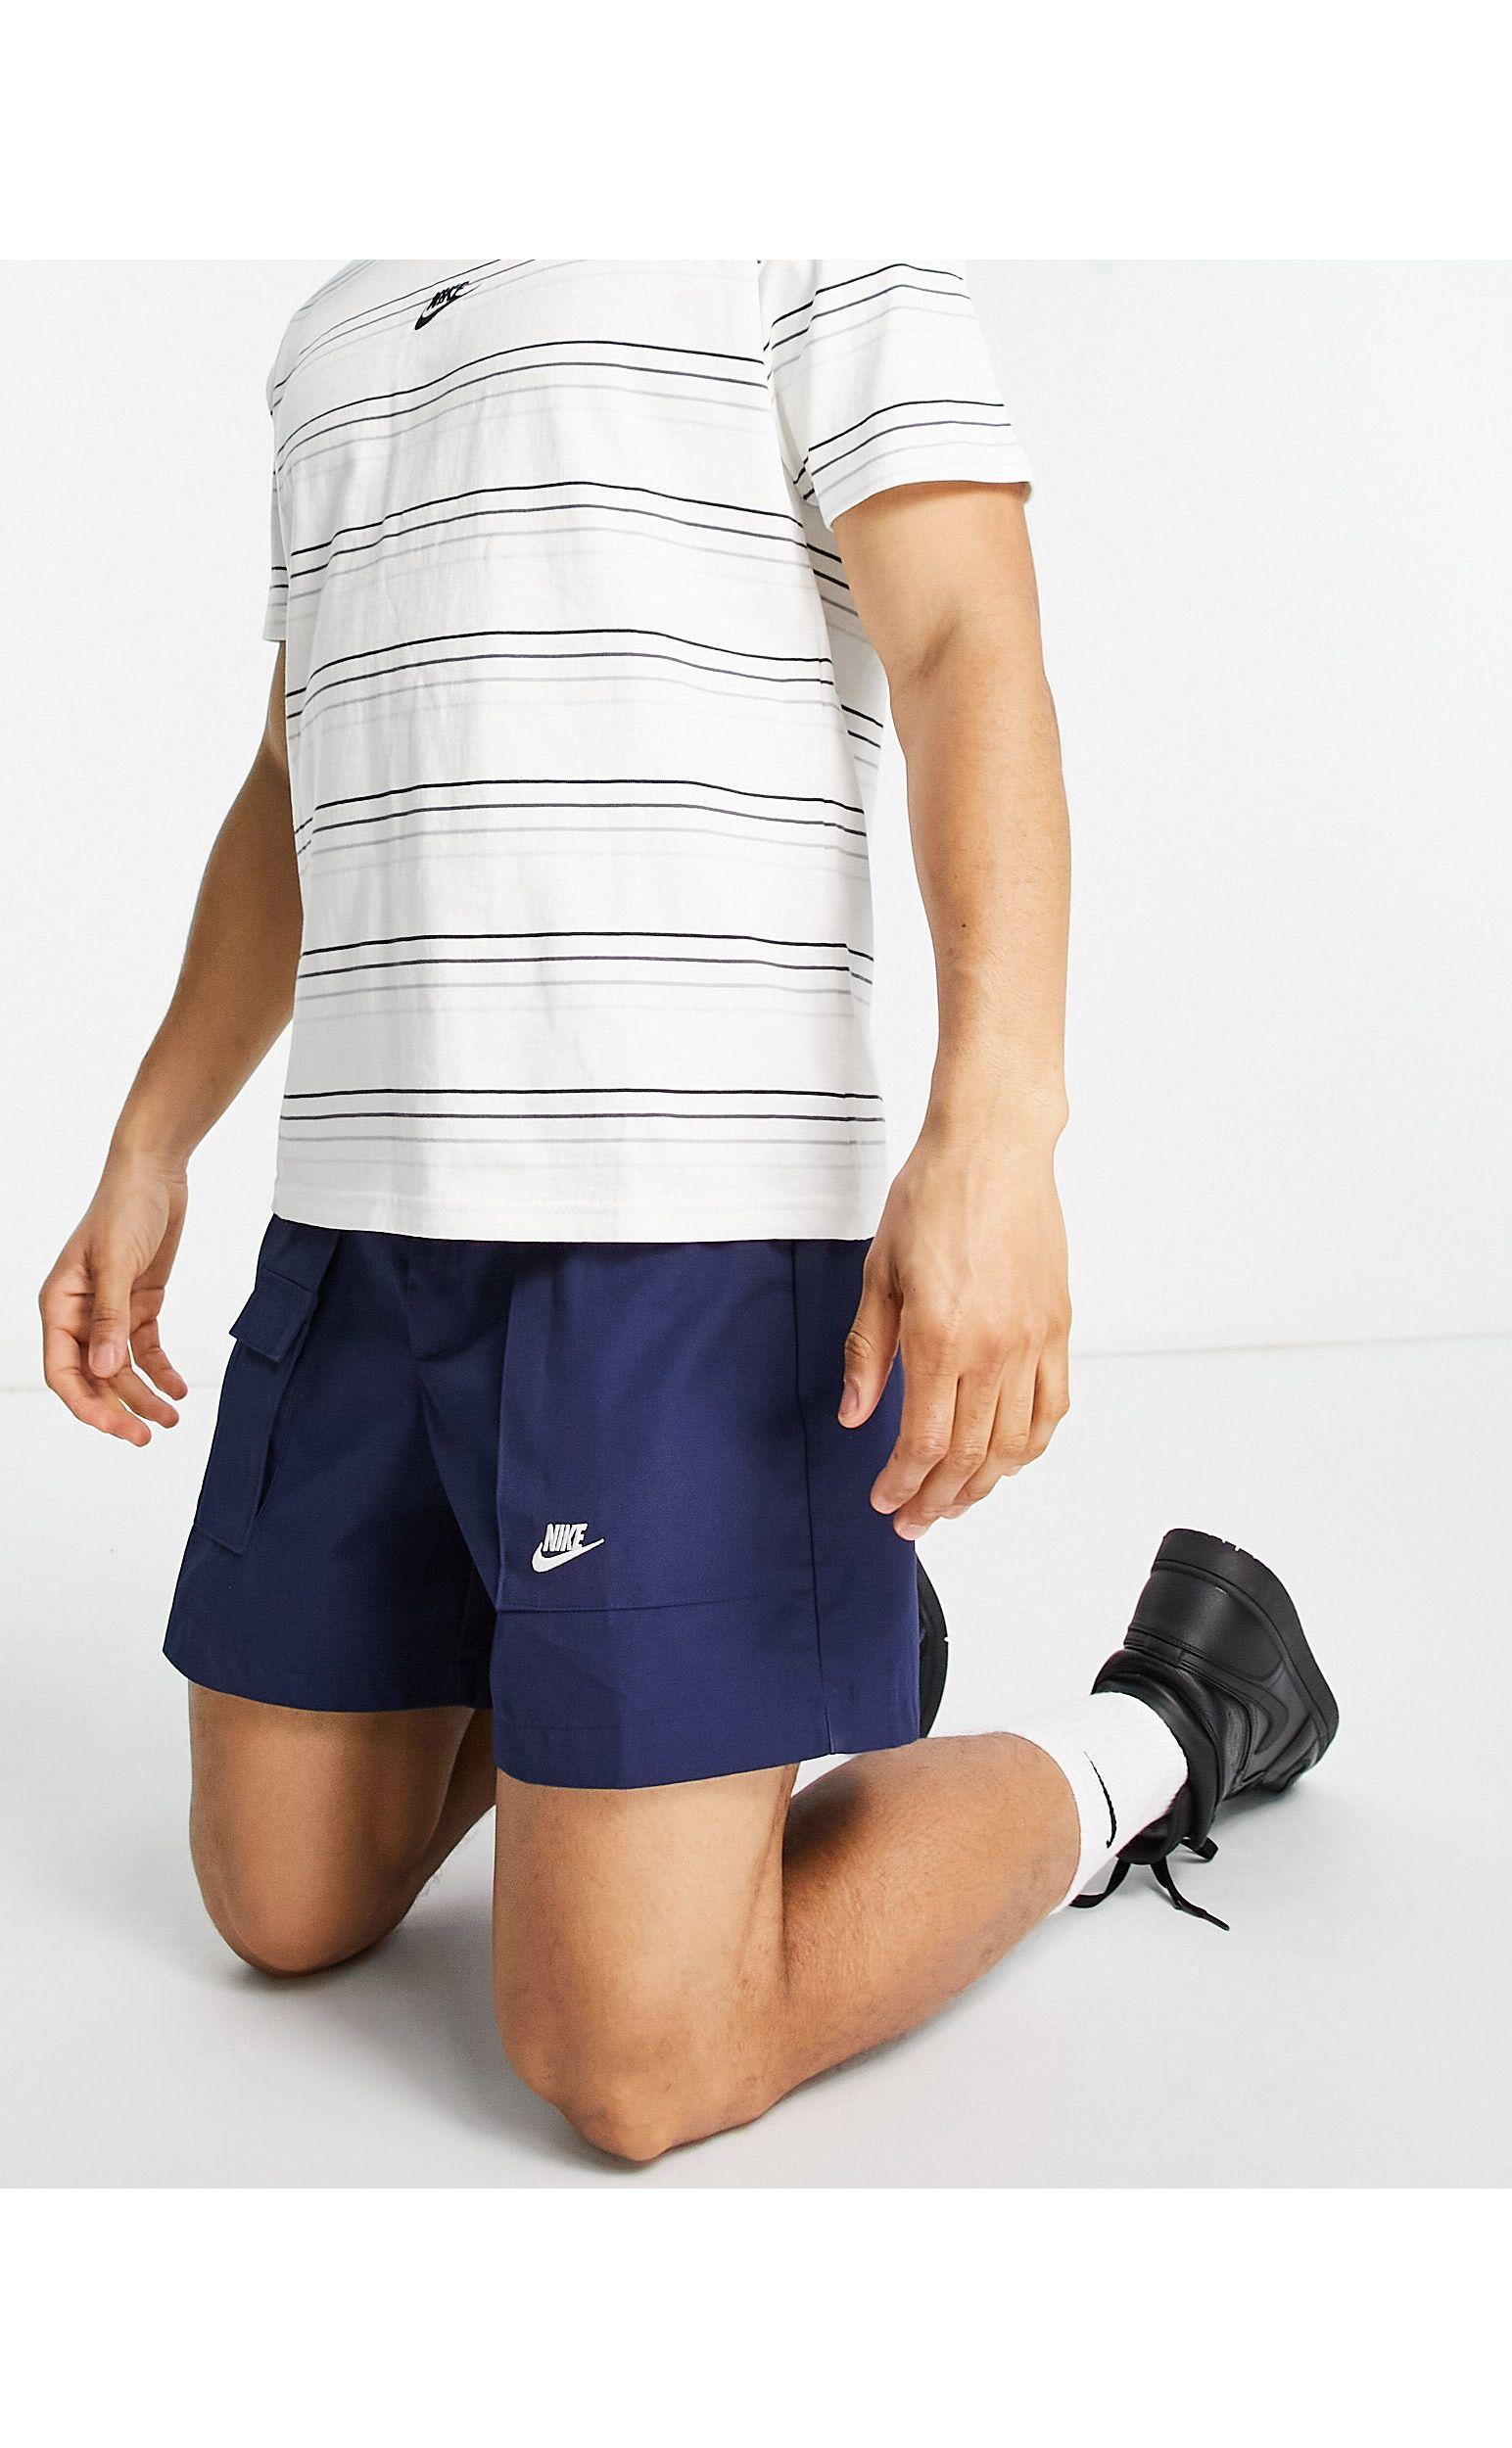 Nike Cotton Reissue Pack Woven Shorts in Navy (Blue) for Men - Lyst